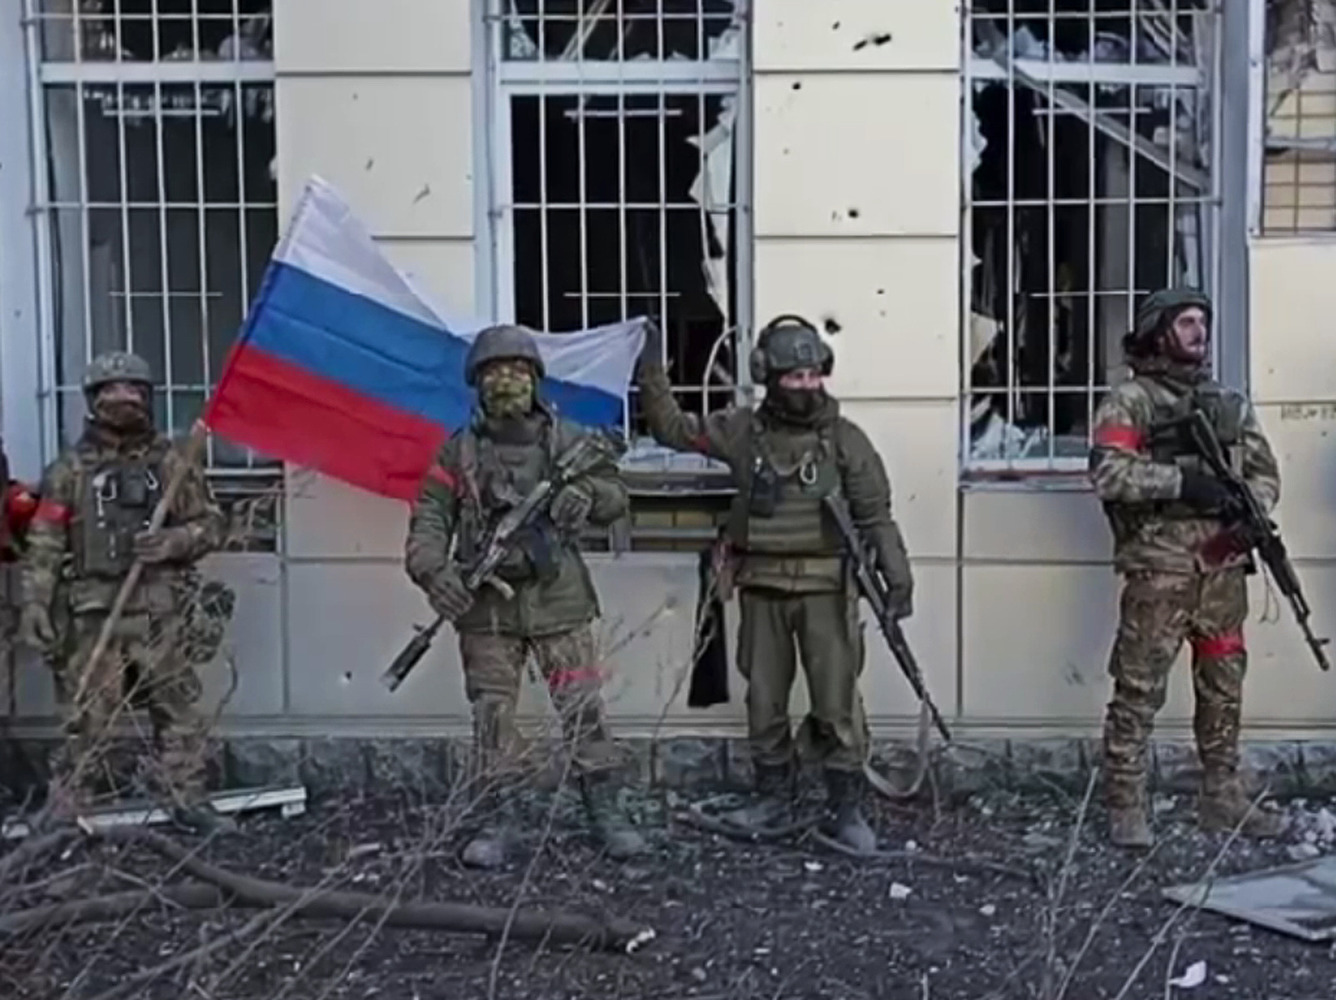 Avdeevka was taken: footage of the raising of the Russian tricolor and the flight of the Ukrainian Armed Forces